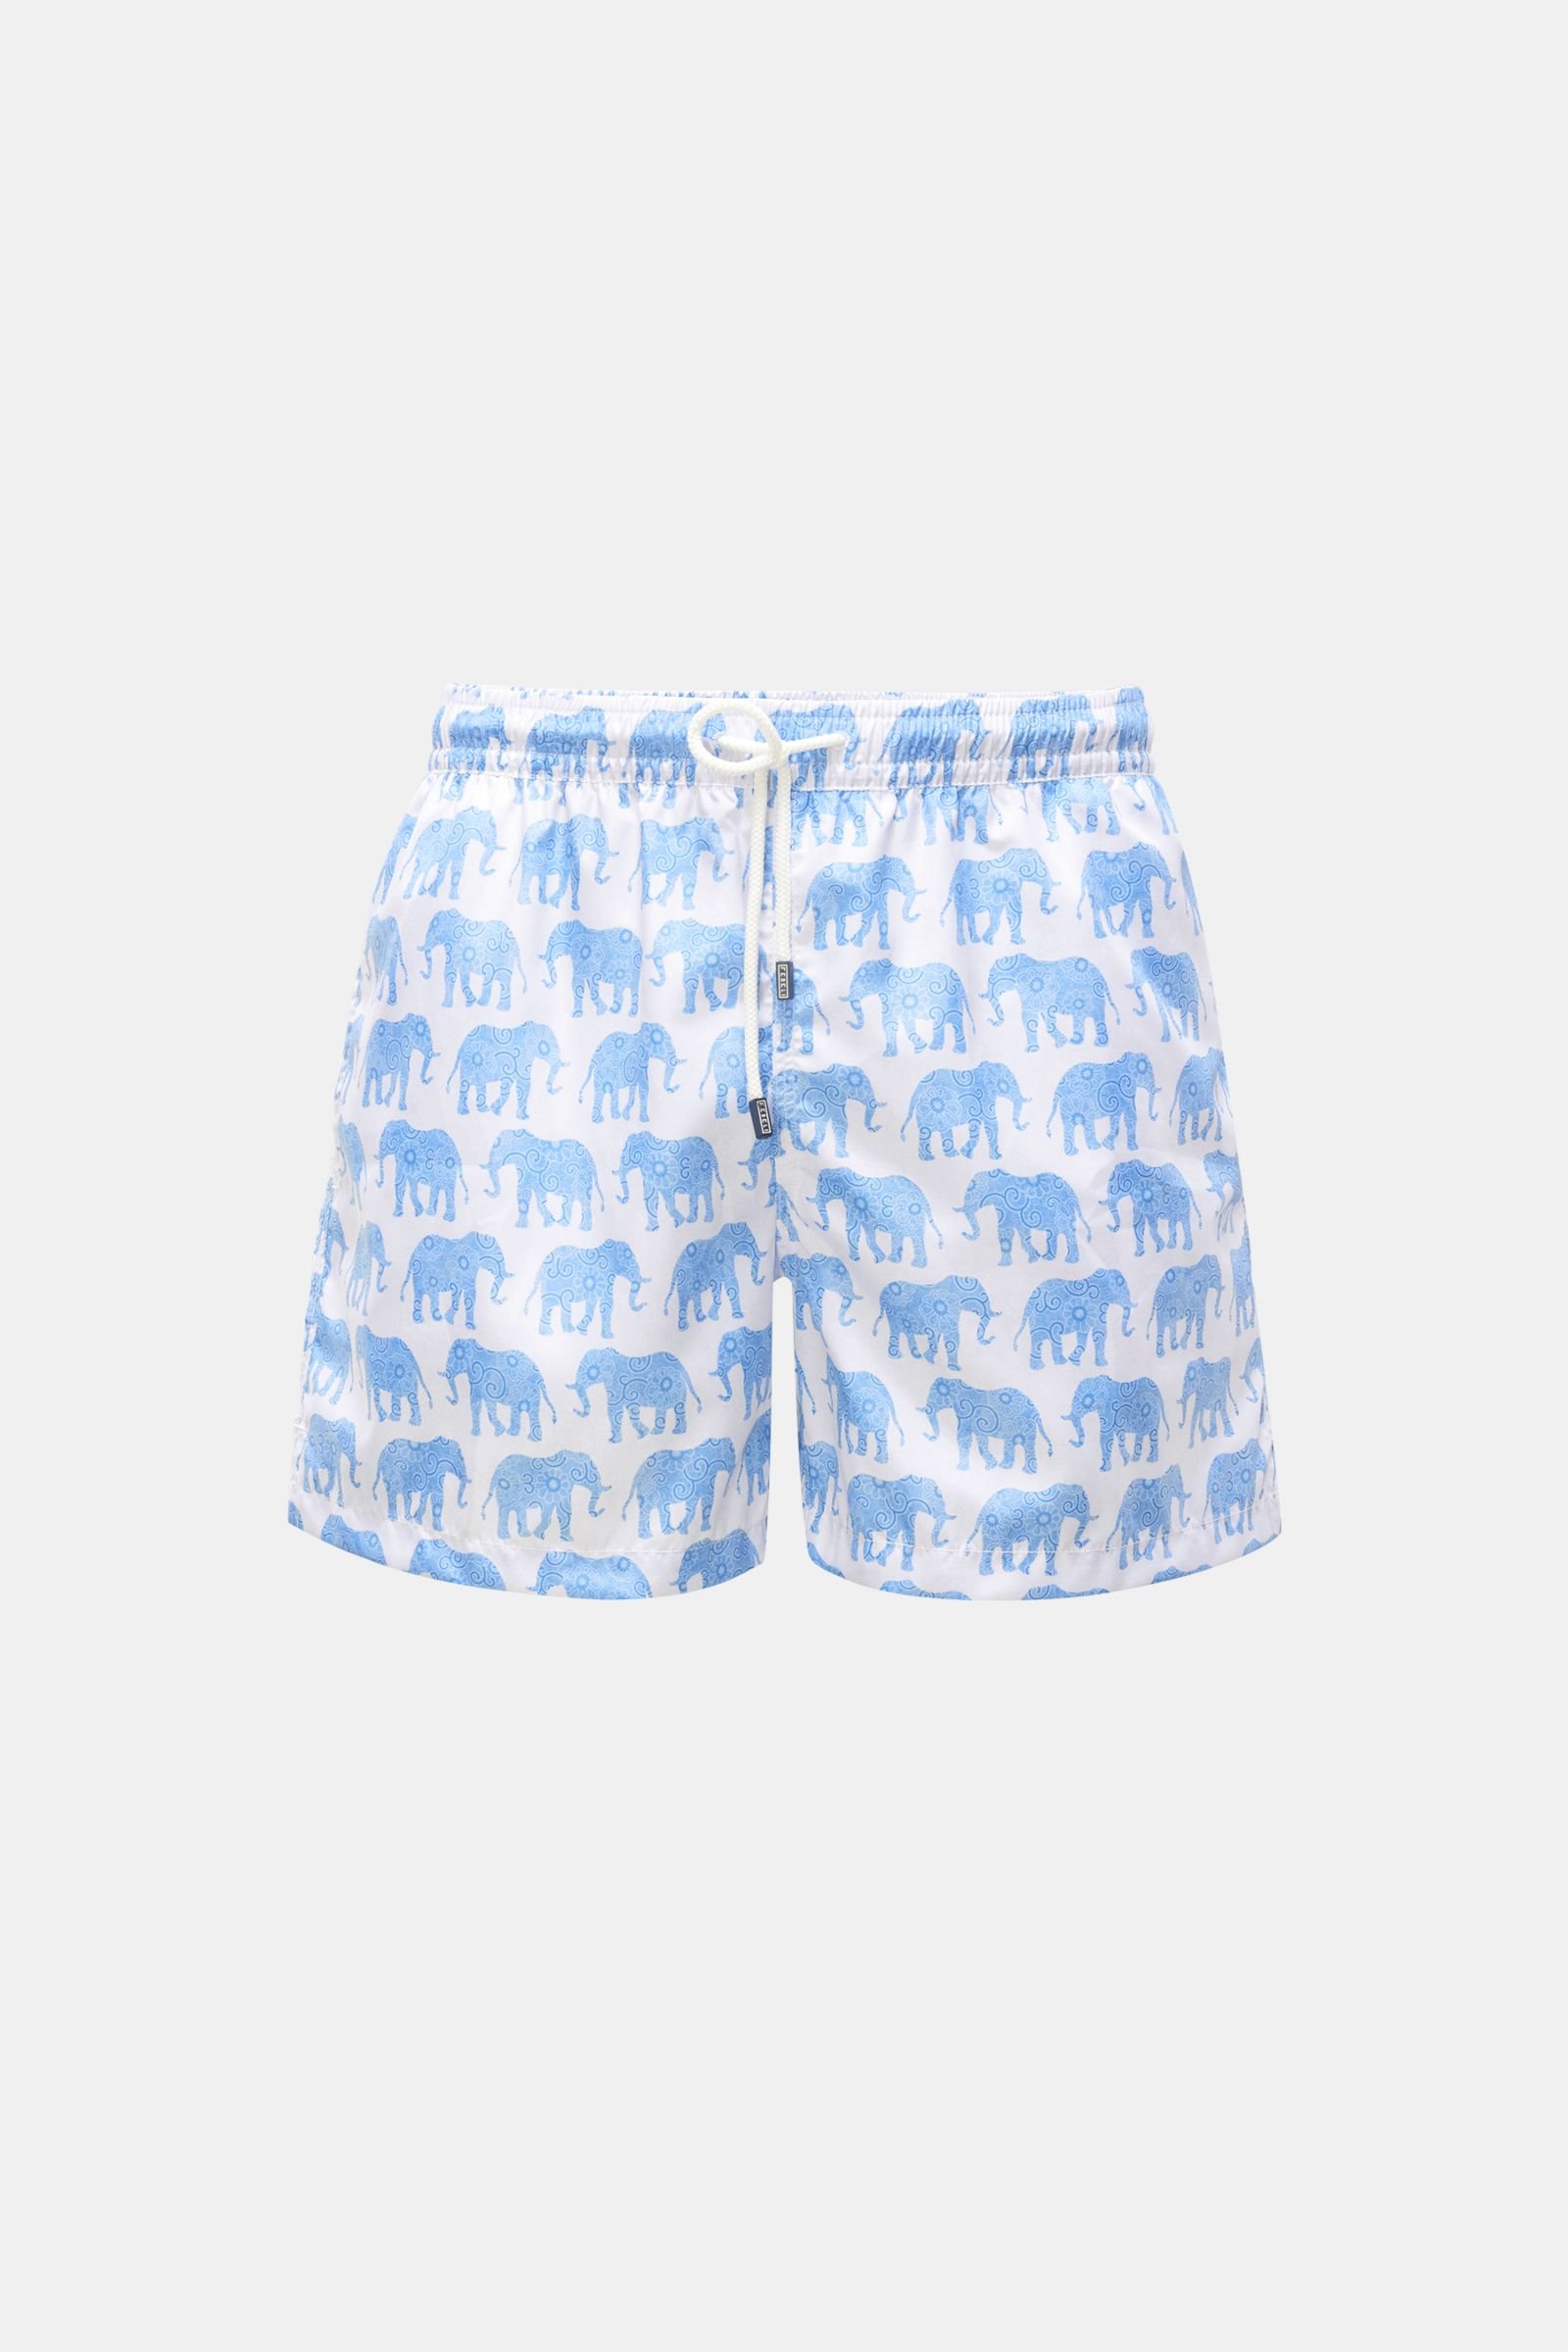 Swim shorts 'Madeira Airstop' pastel blue/smoky blue patterned